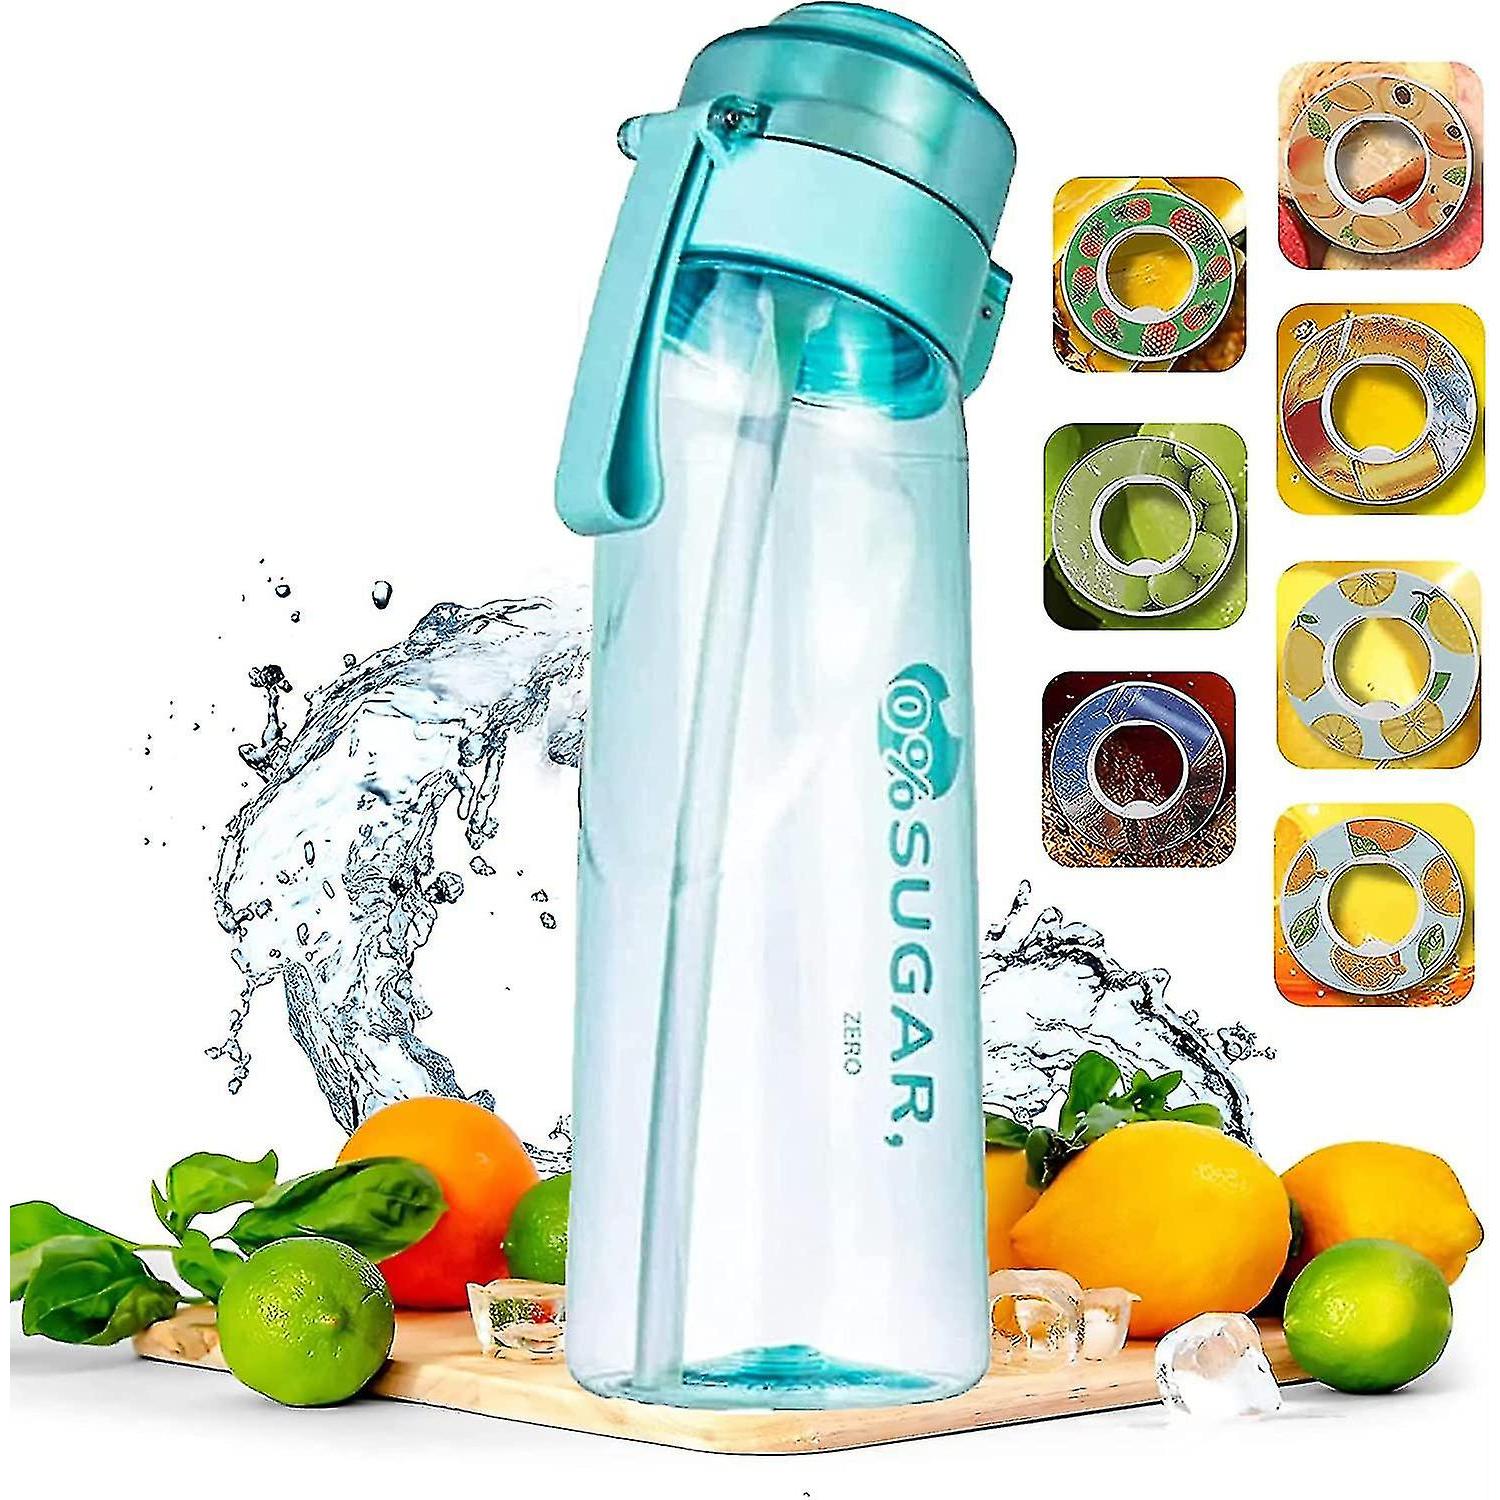 New 7 Flavors Air Up Water Bottle Flavour Pods With Air Water Bottle Bottle  0 Sugar And 0 Calories